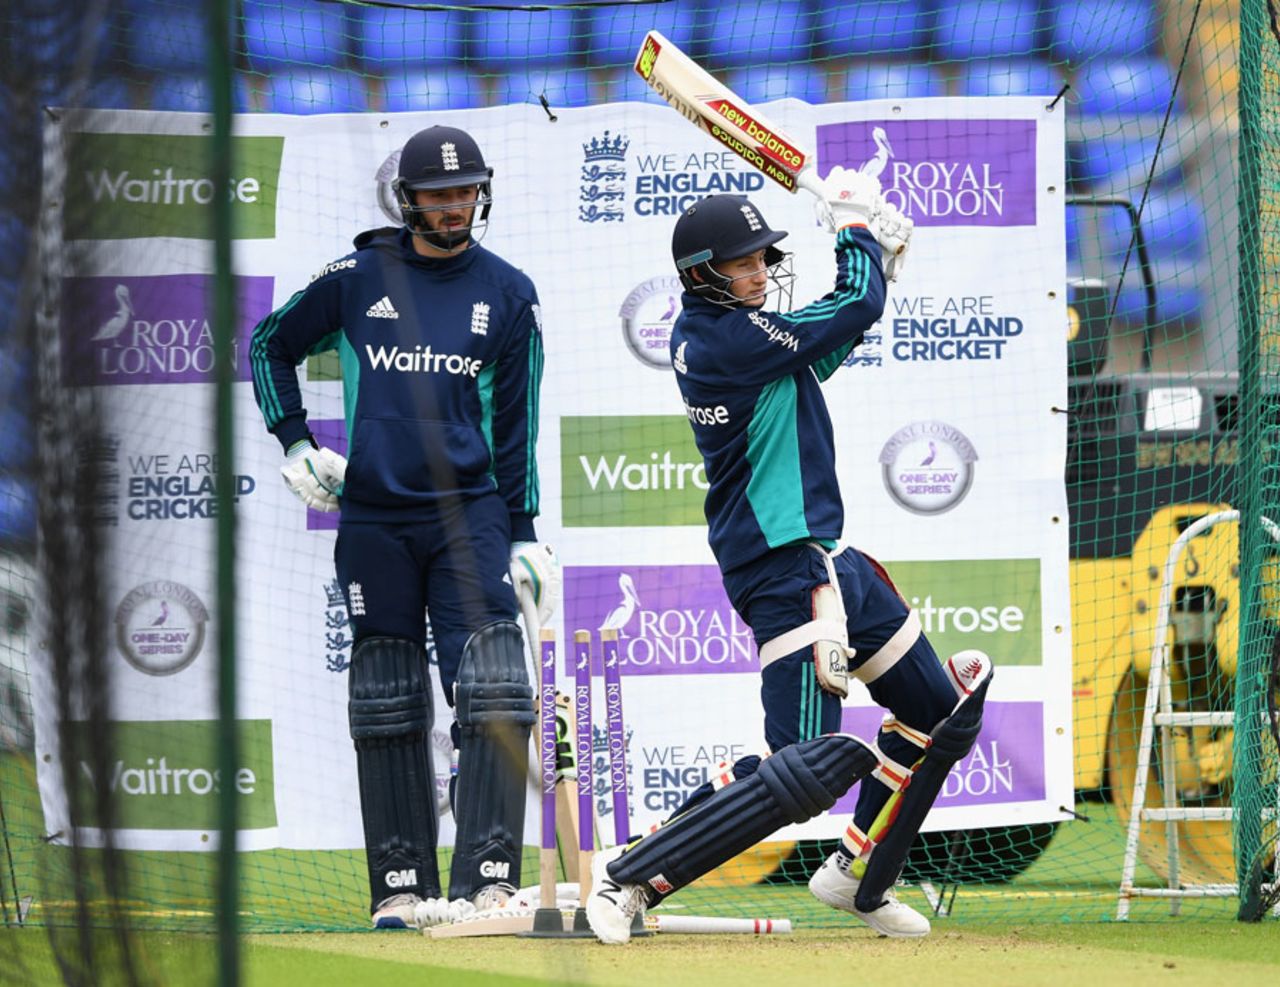 James Vince watches Joe Root in action in the nets, England v Sri Lanka, 5th ODI, Cardiff, July 1, 2016